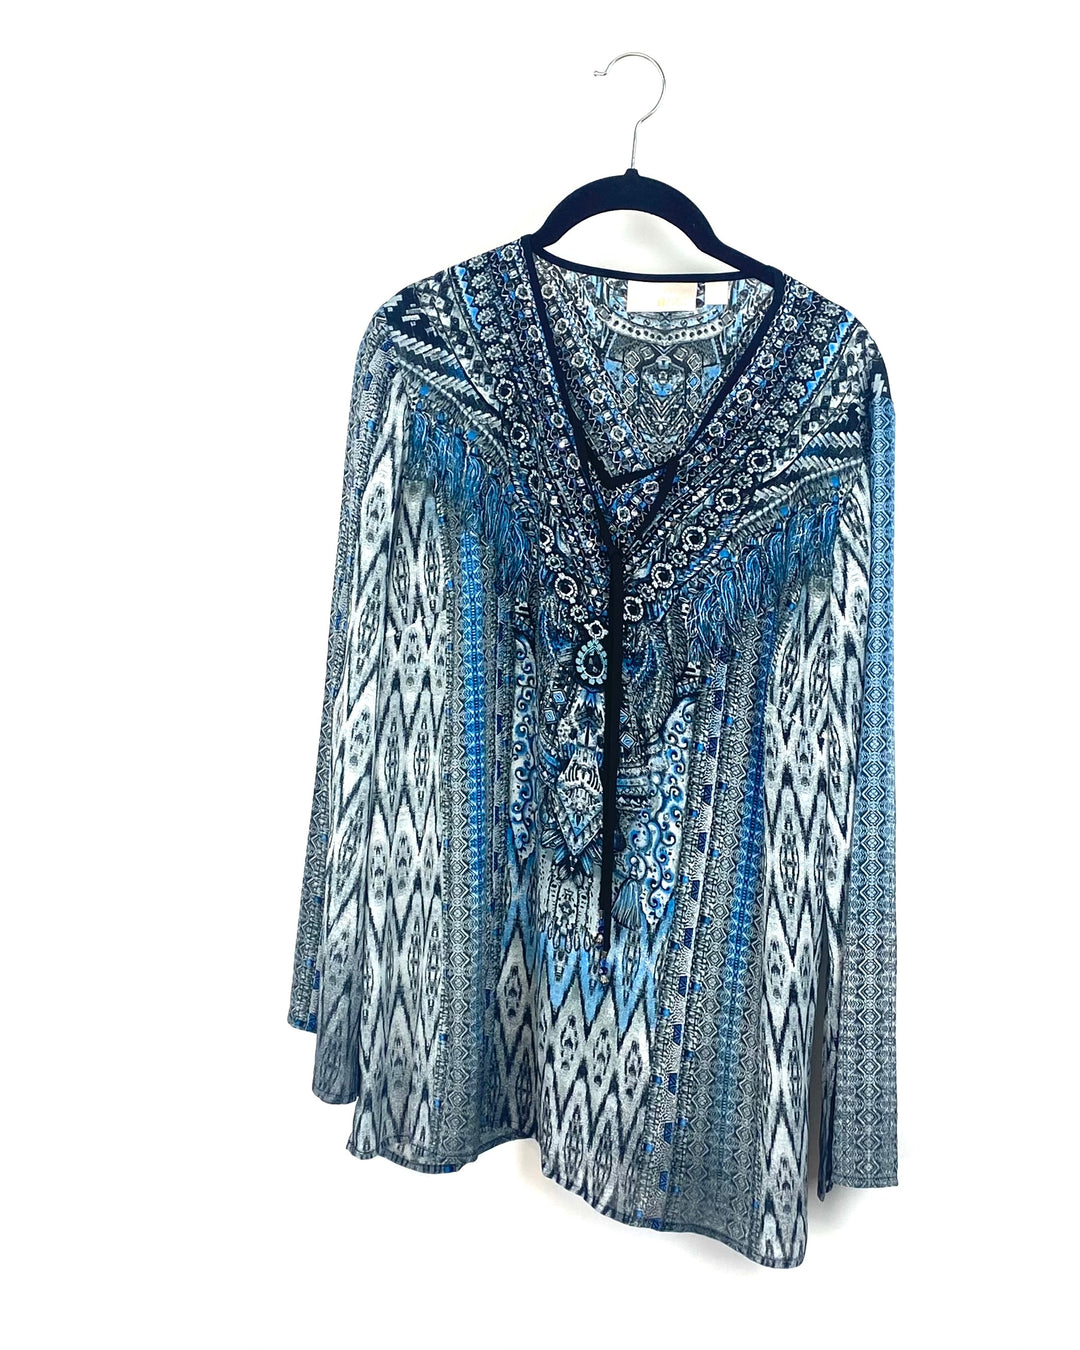 Blue And Grey Long Sleeve Blouse With Beaded Neck Line - Medium/Large